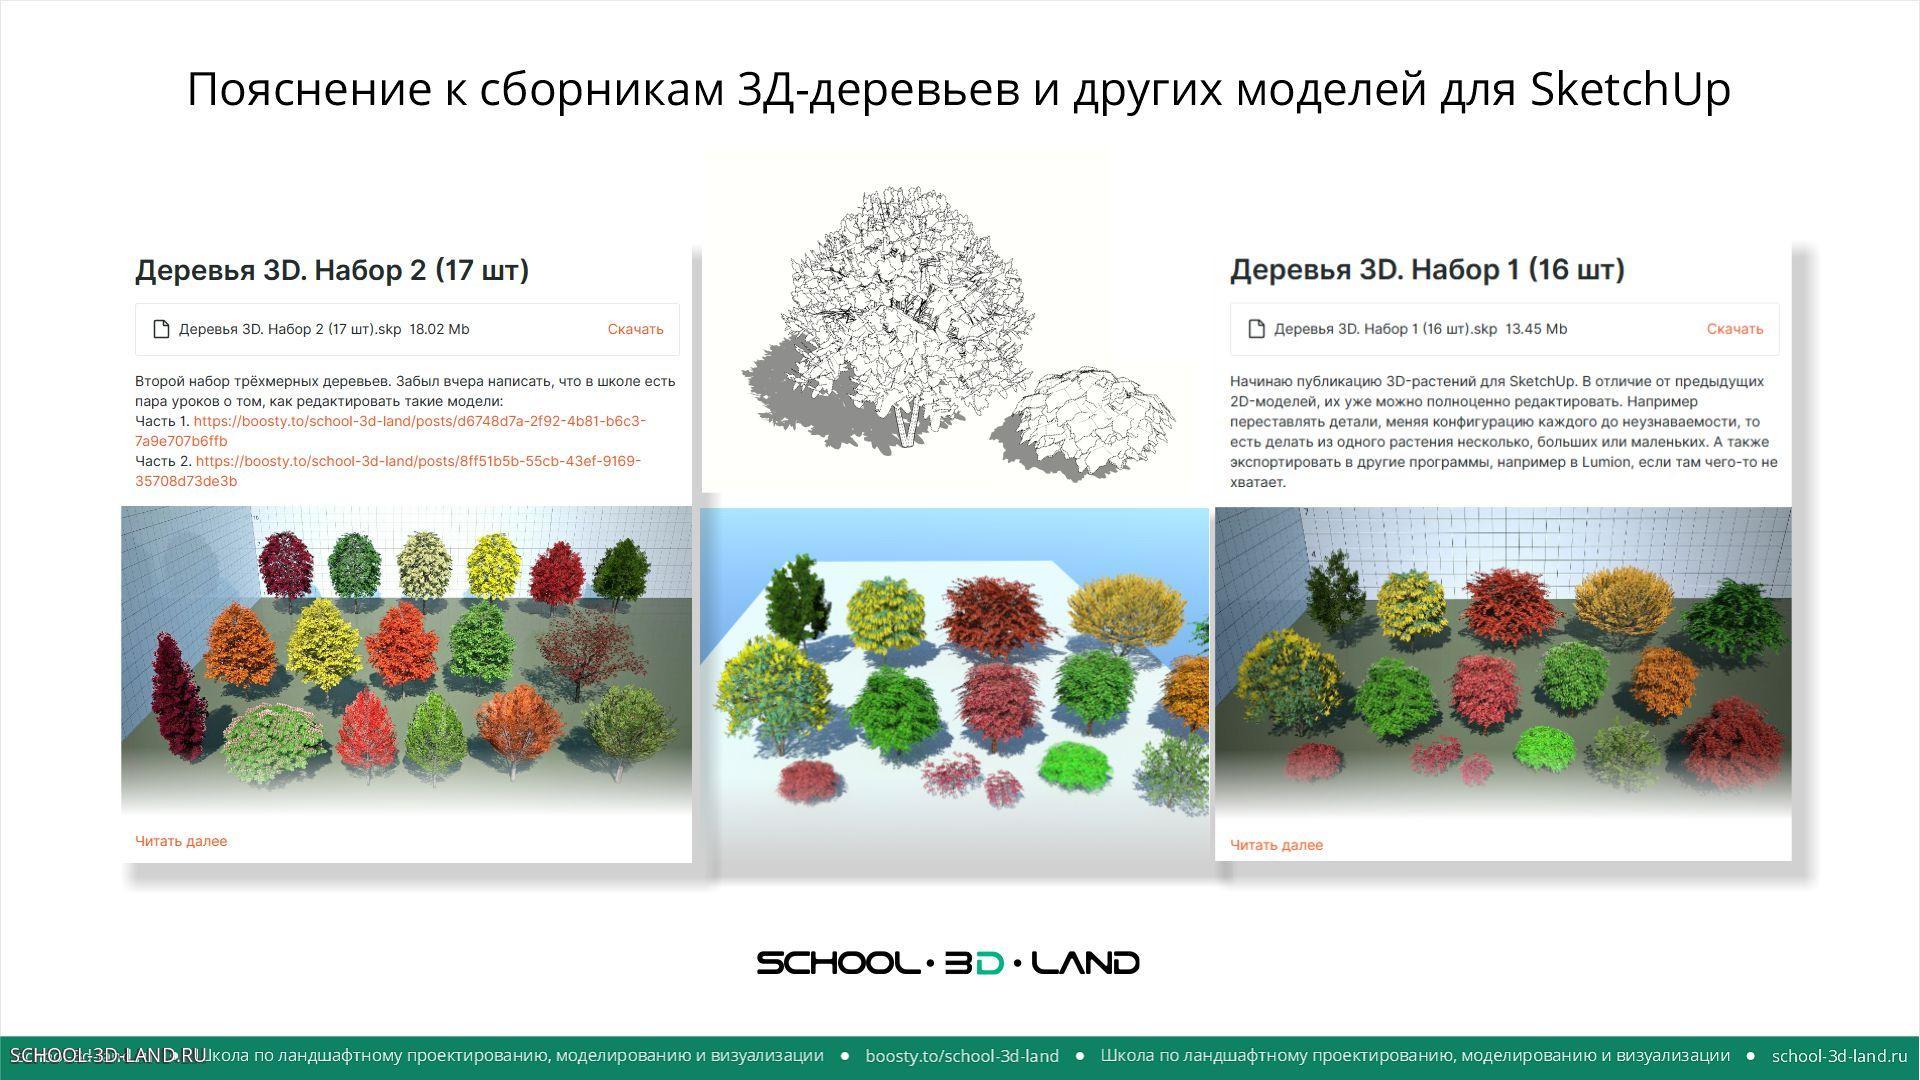 Explanation to the collections of 3D trees for SketchUp